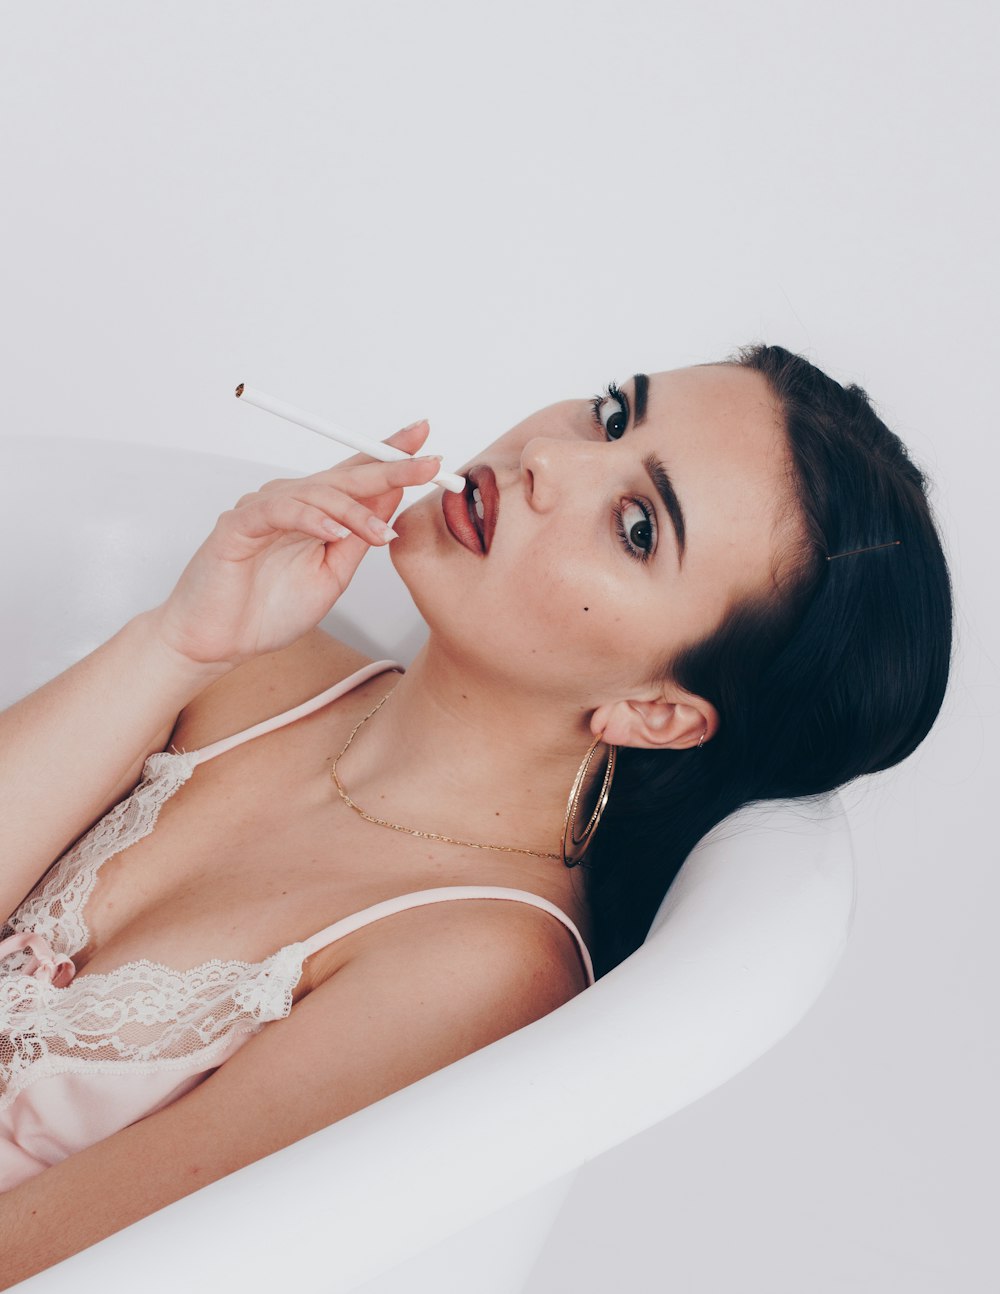 a woman in a bathtub with a cigarette in her mouth